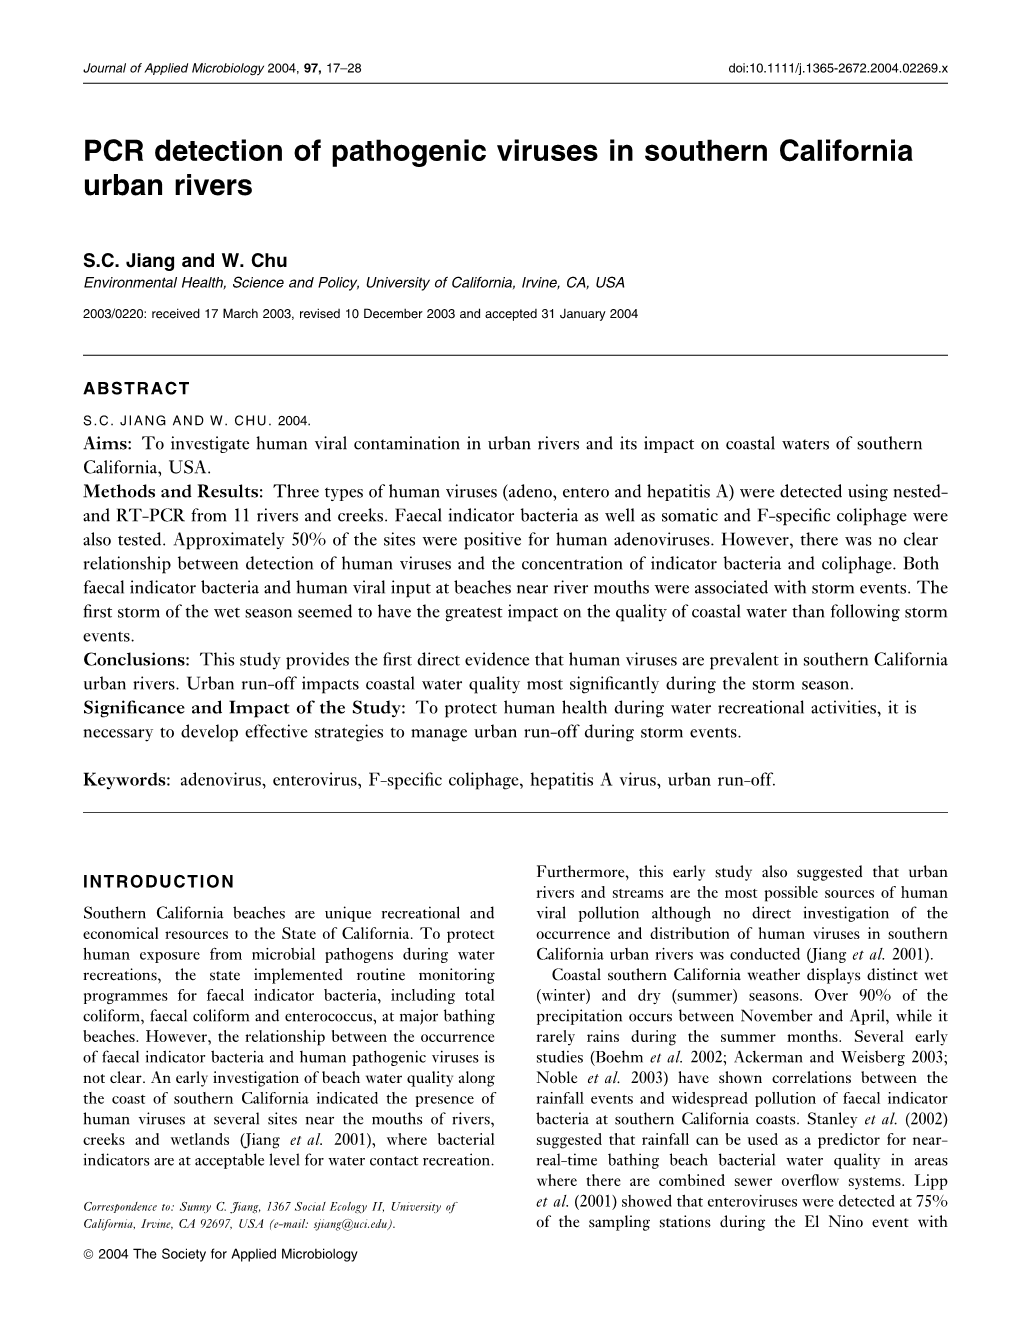 PCR Detection of Pathogenic Viruses in Southern California Urban Rivers